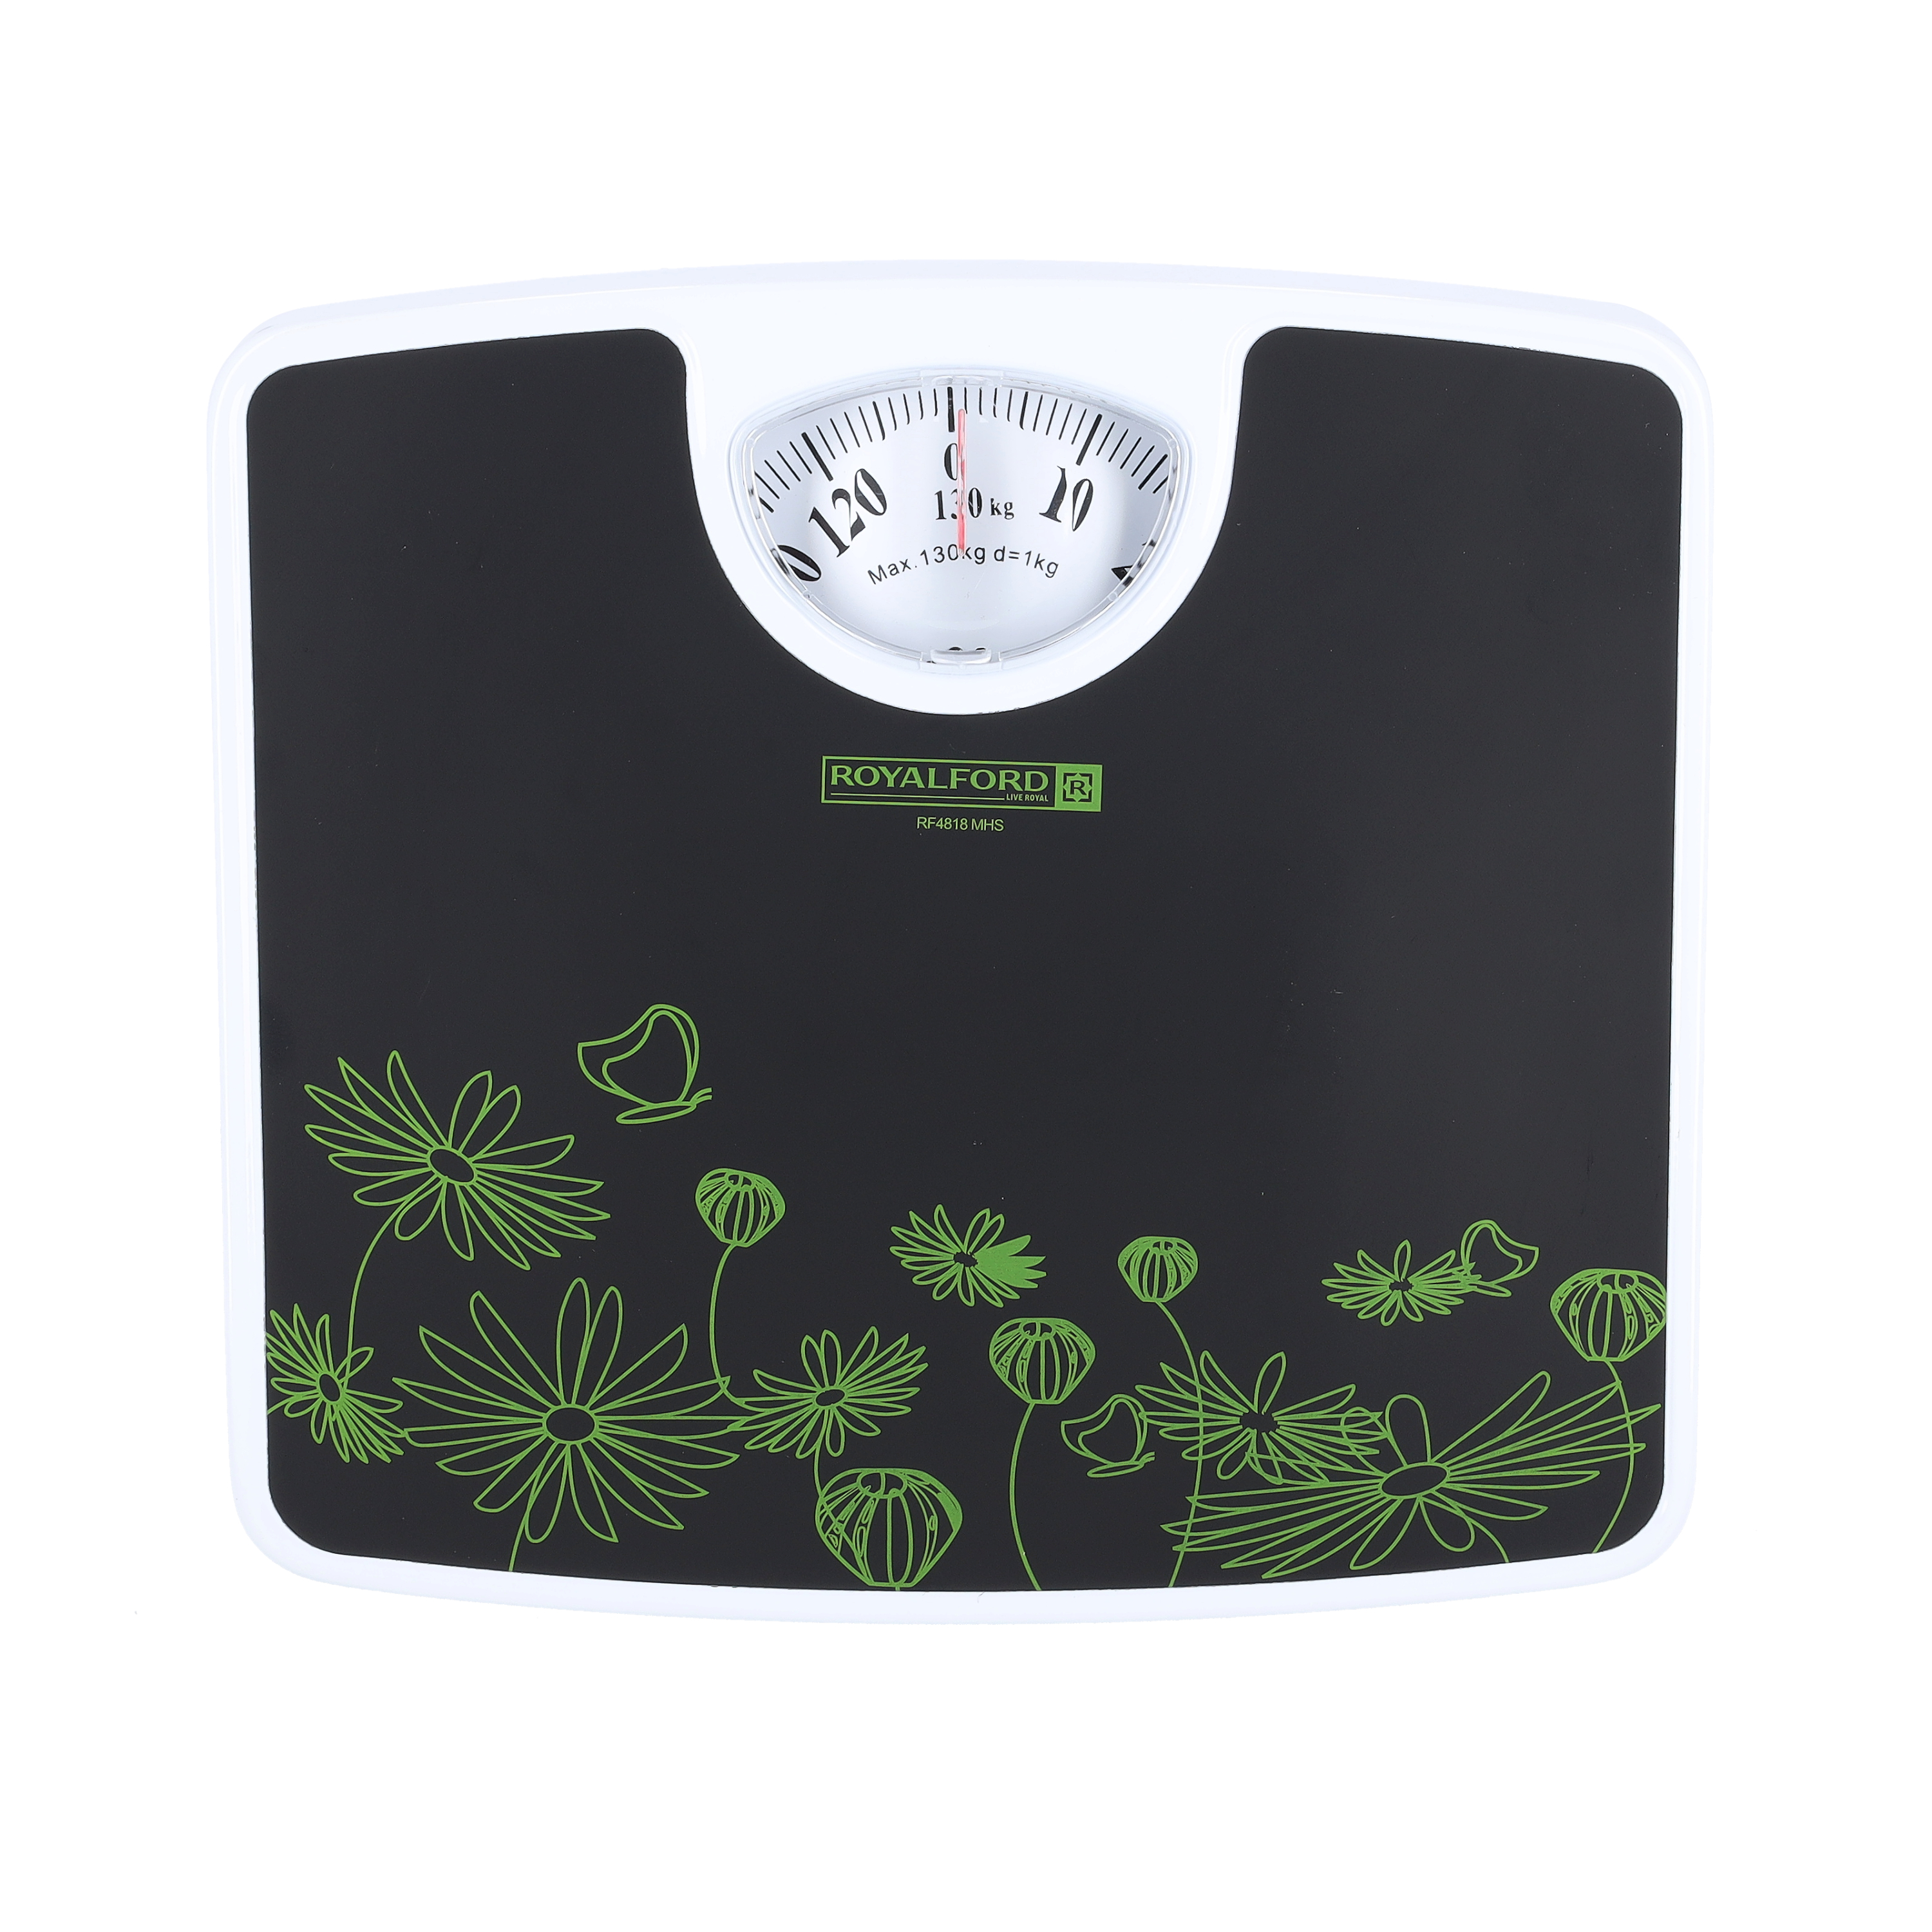 Buy Royalford Rf4818 Weighing Scale - Analogue Manual Mechanical Weighing  Machine For Human Body-Weight Machine, 130Kg Capacity, Bathroom Scale,  Large Rotating Dial, Compact Online - Shop Home & Garden on Carrefour UAE